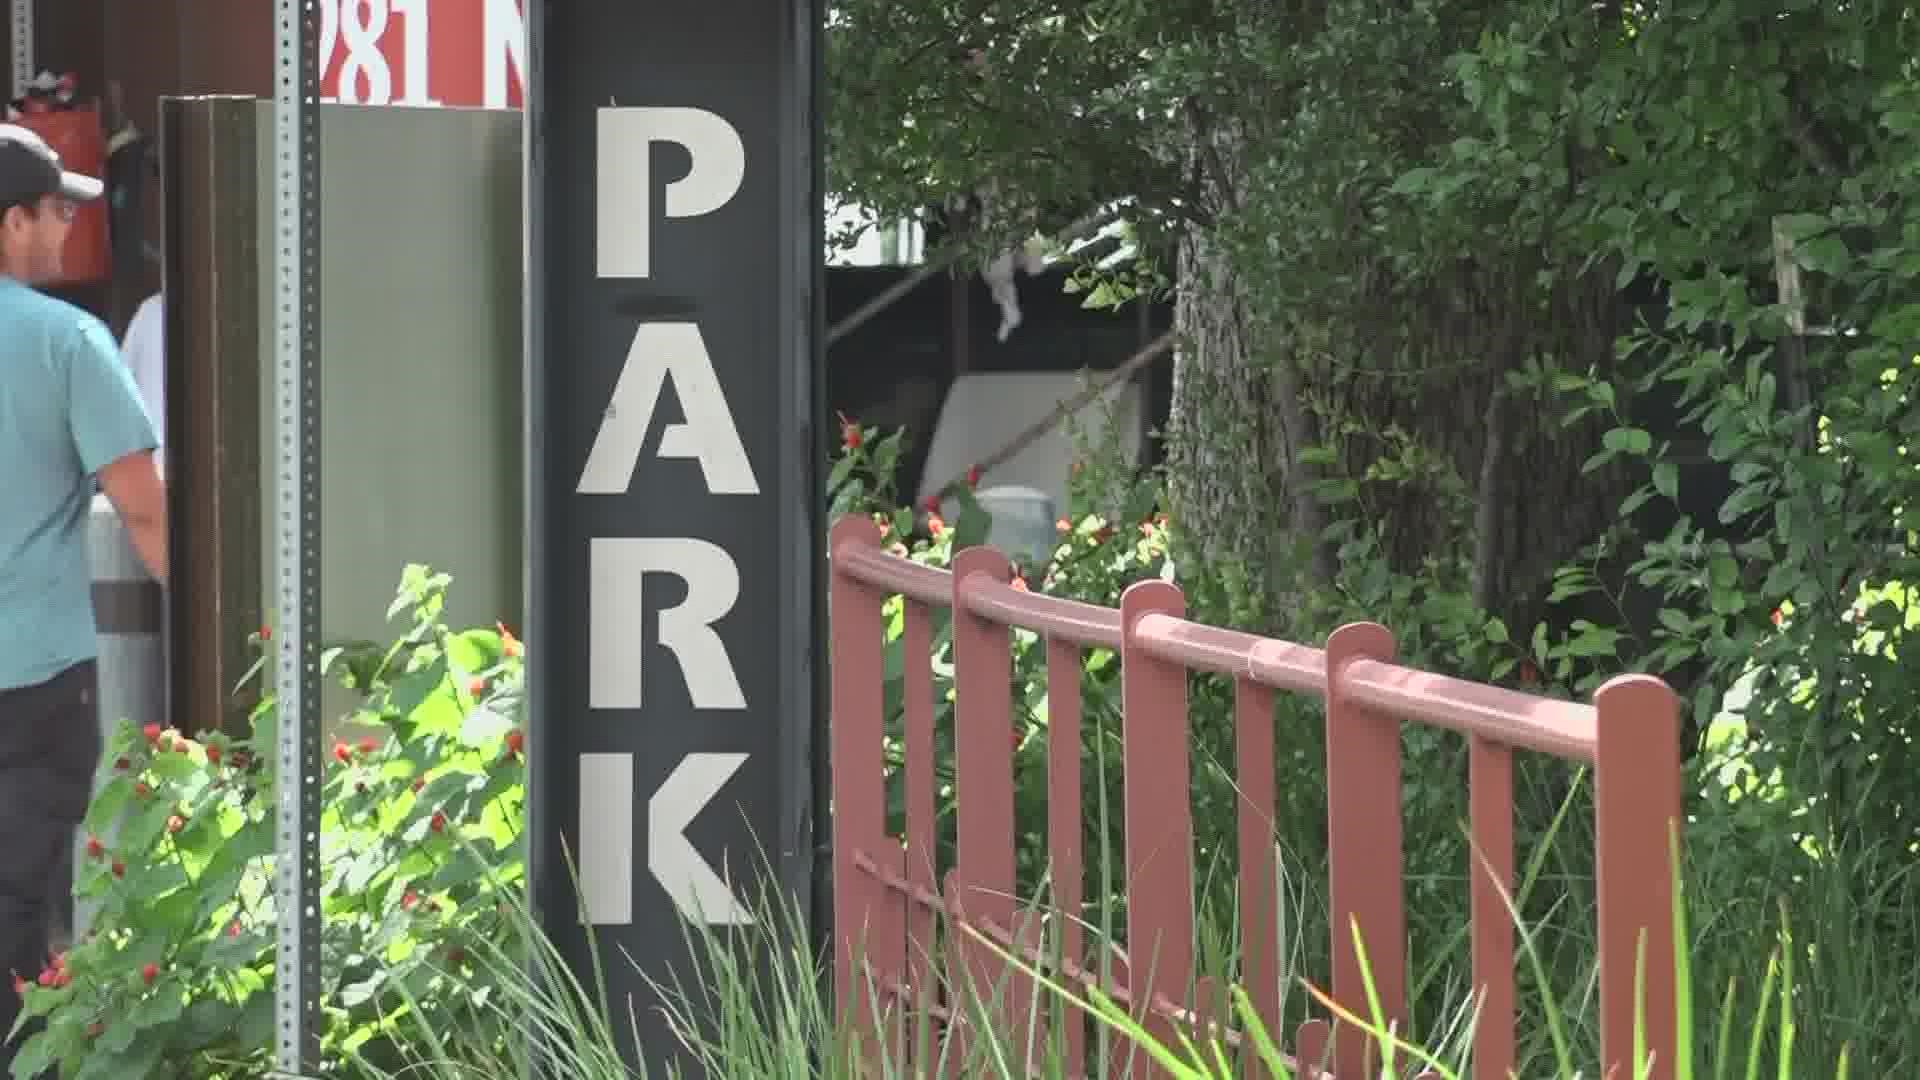 Parking can now cost up to 10 dollars at the Pearl.